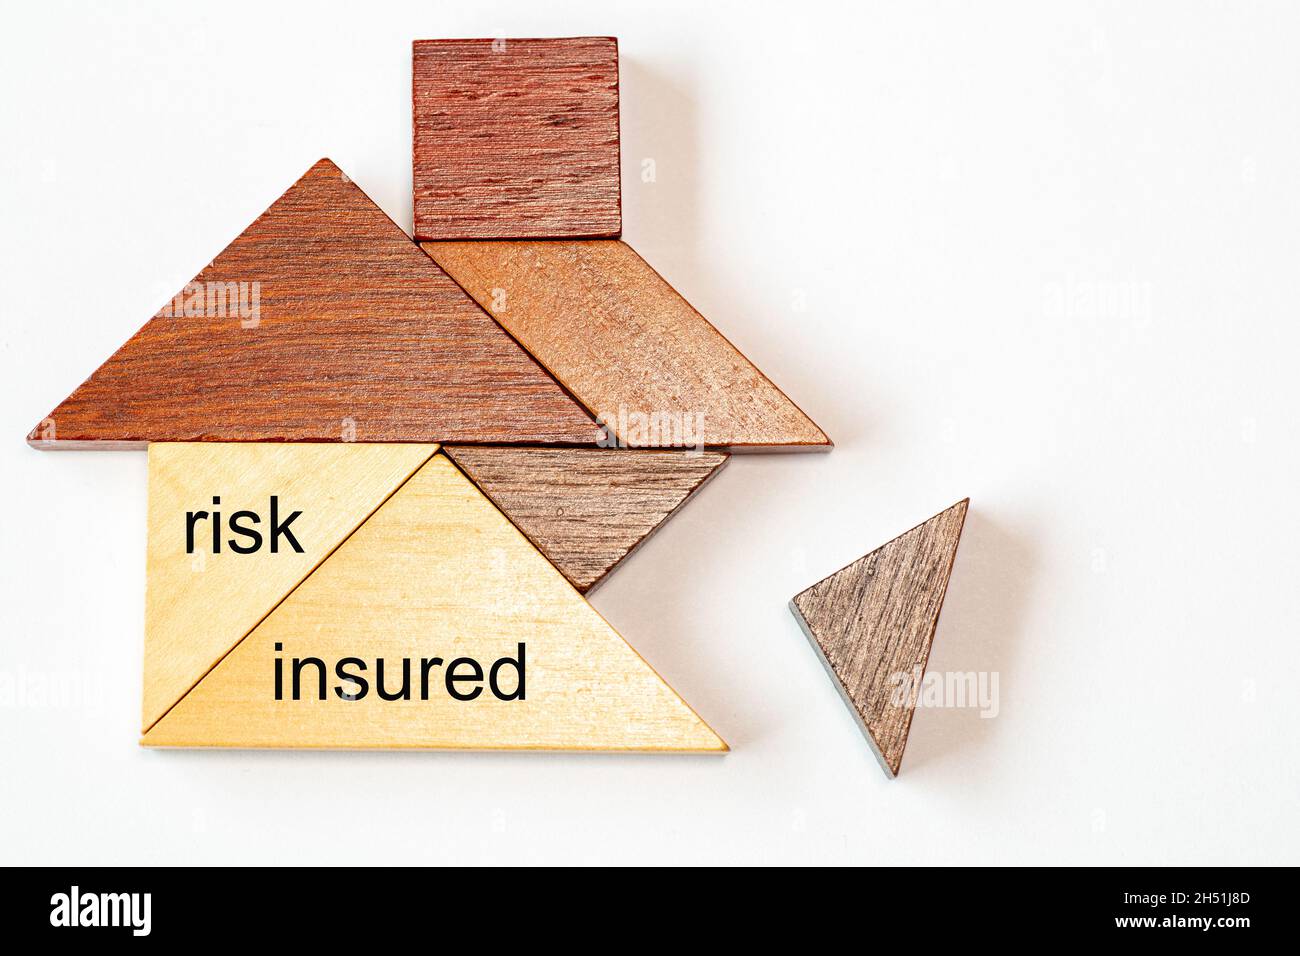 The missing building block is inserted into a tangram house. The words risk and insured are written on two Tangram stones Stock Photo